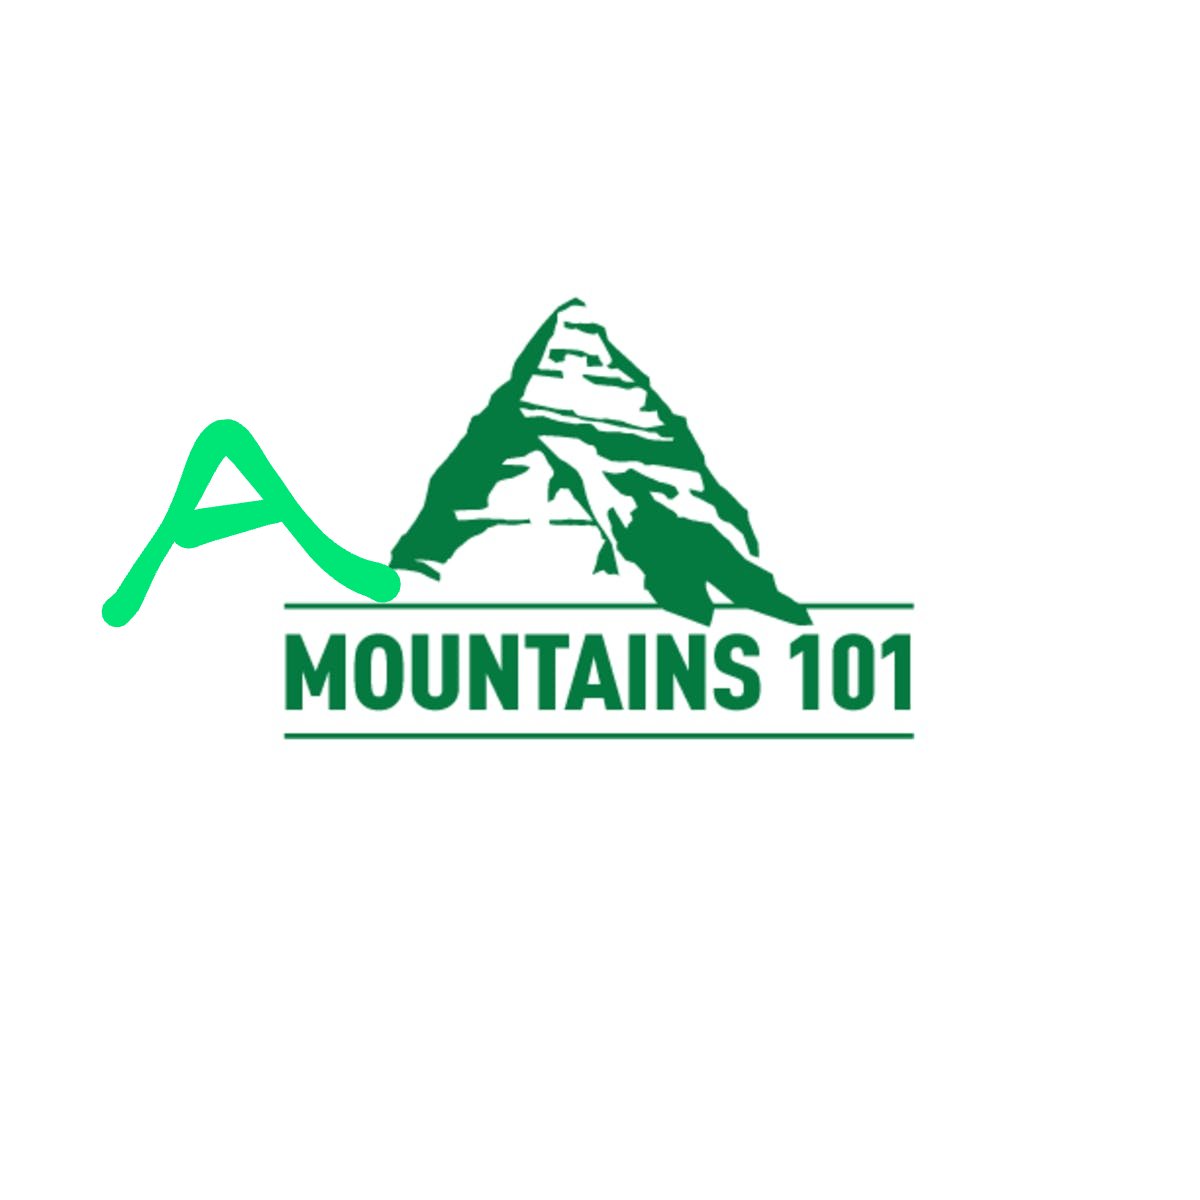 Currently taking a @coursera course on mountains by @davidhik and @zacrobinson_ to better understand #Ararat